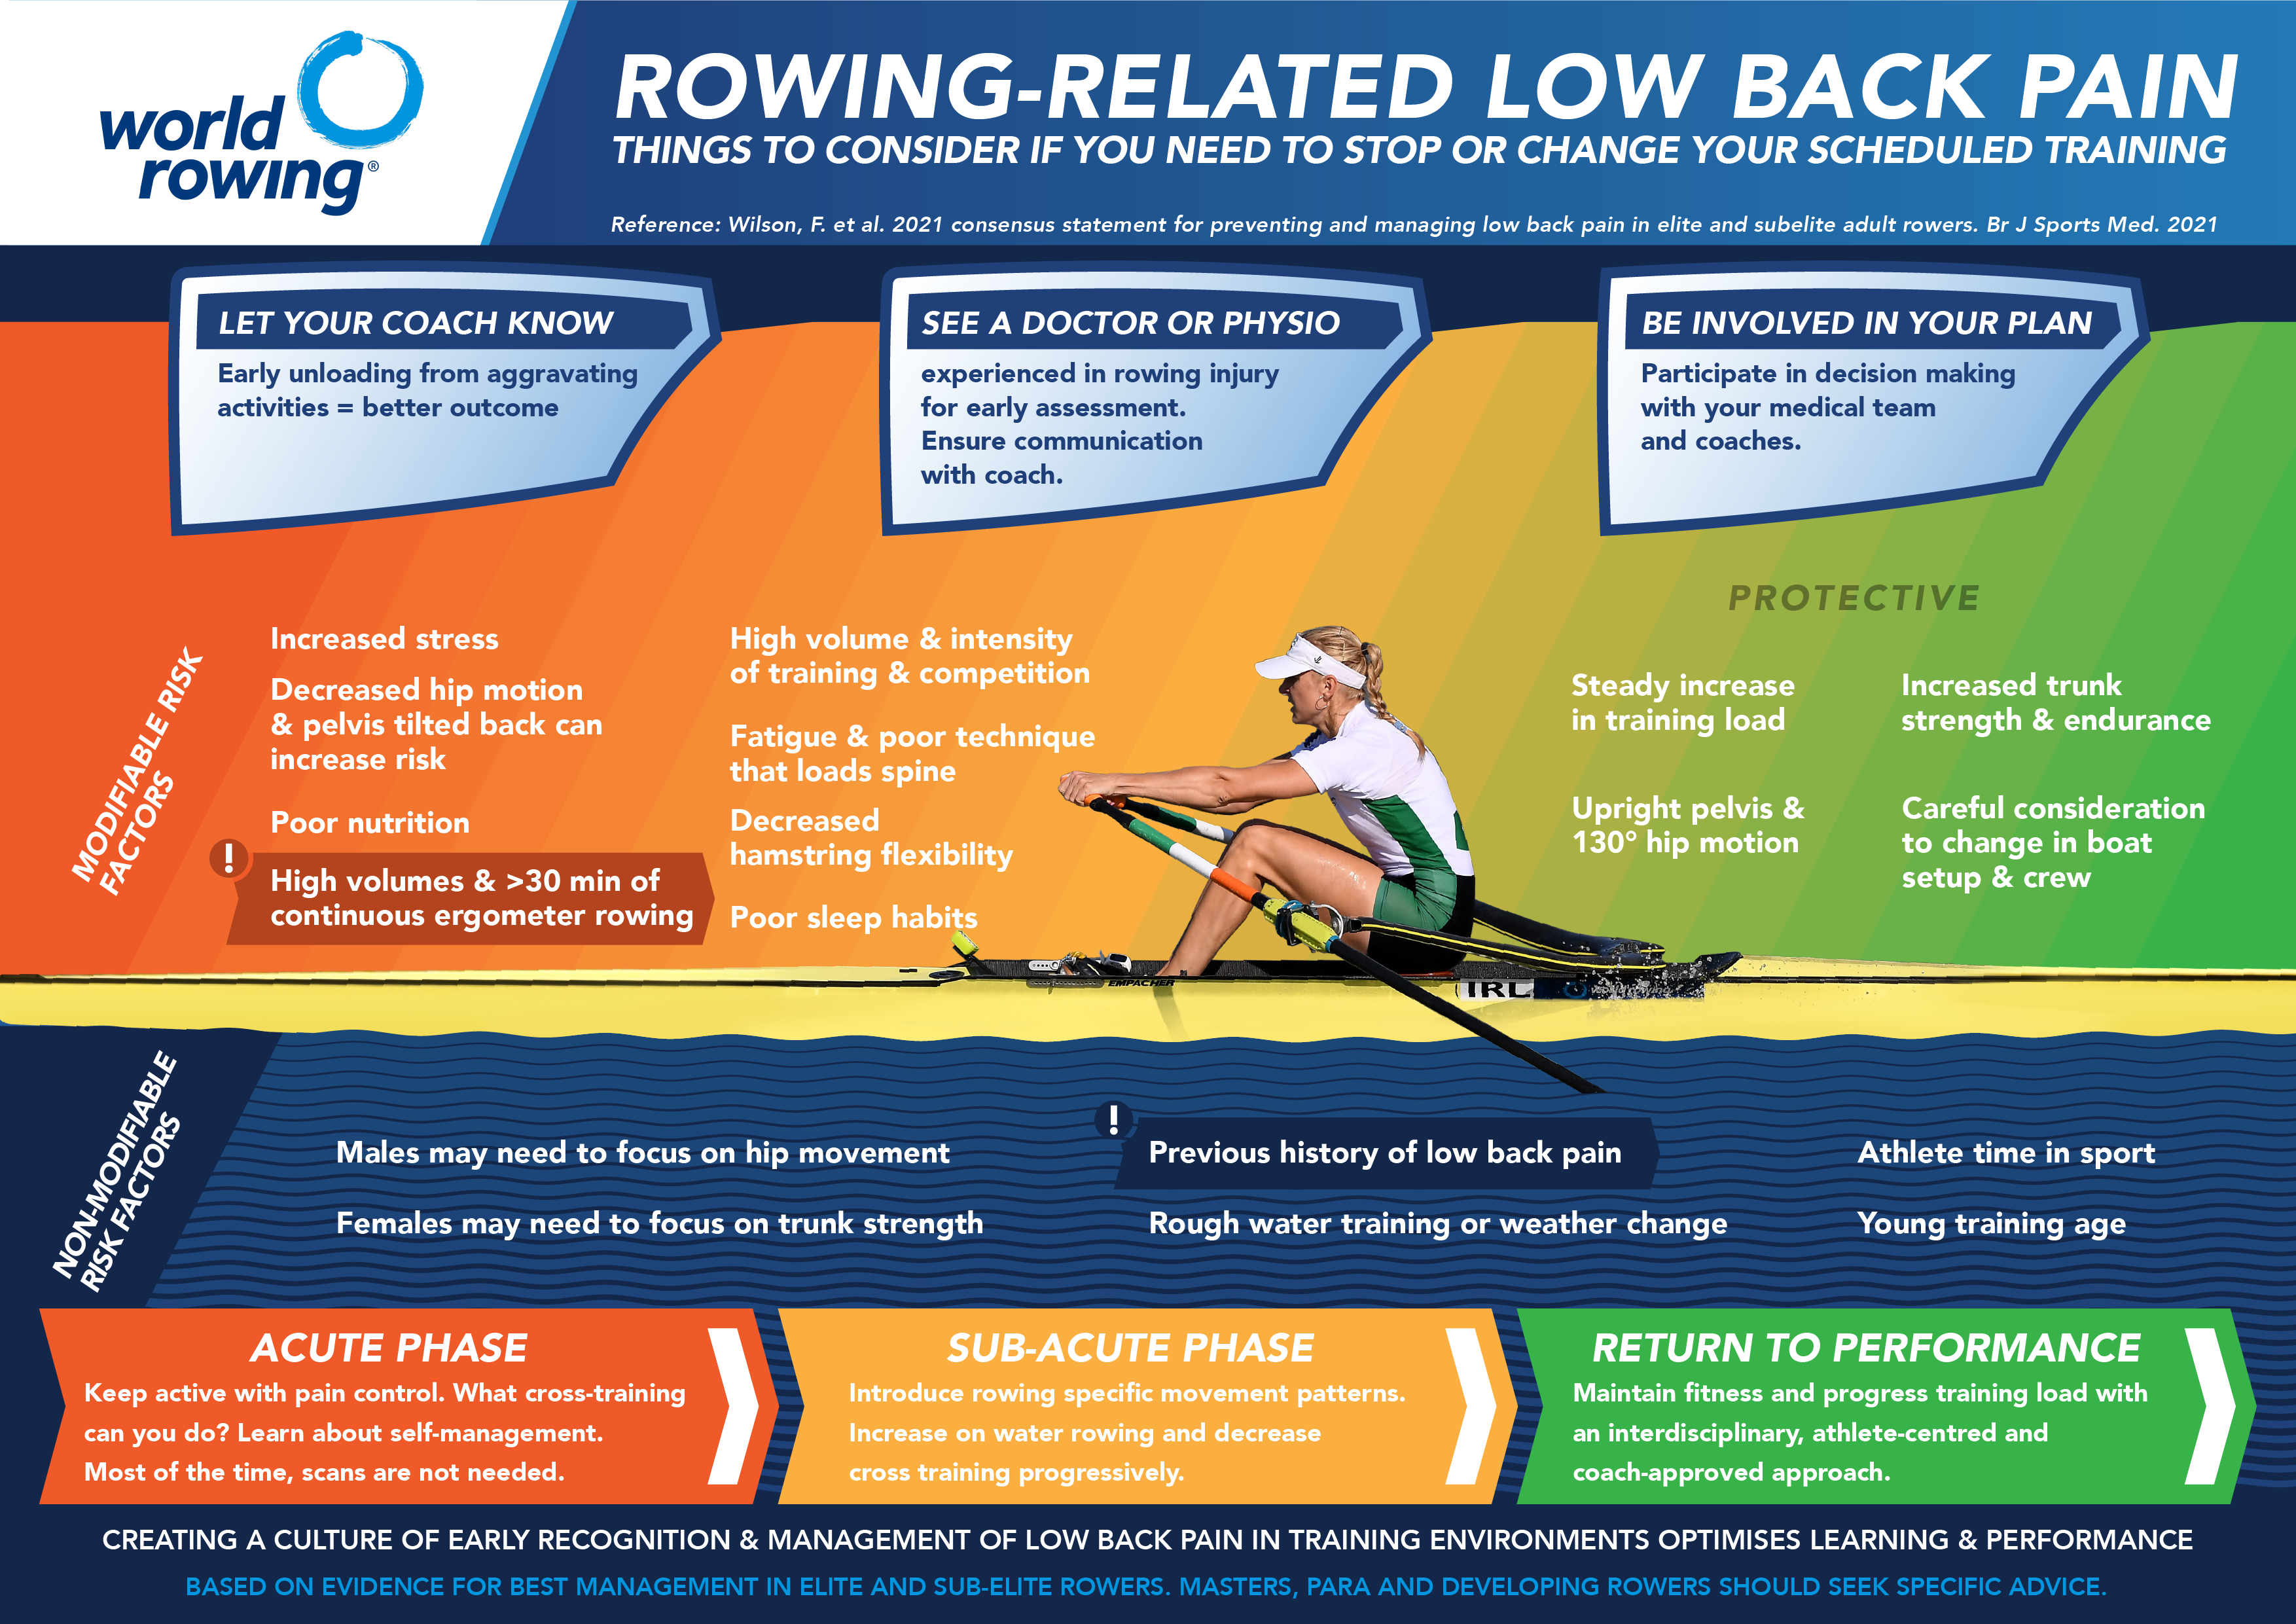 What are the risks of rowing?